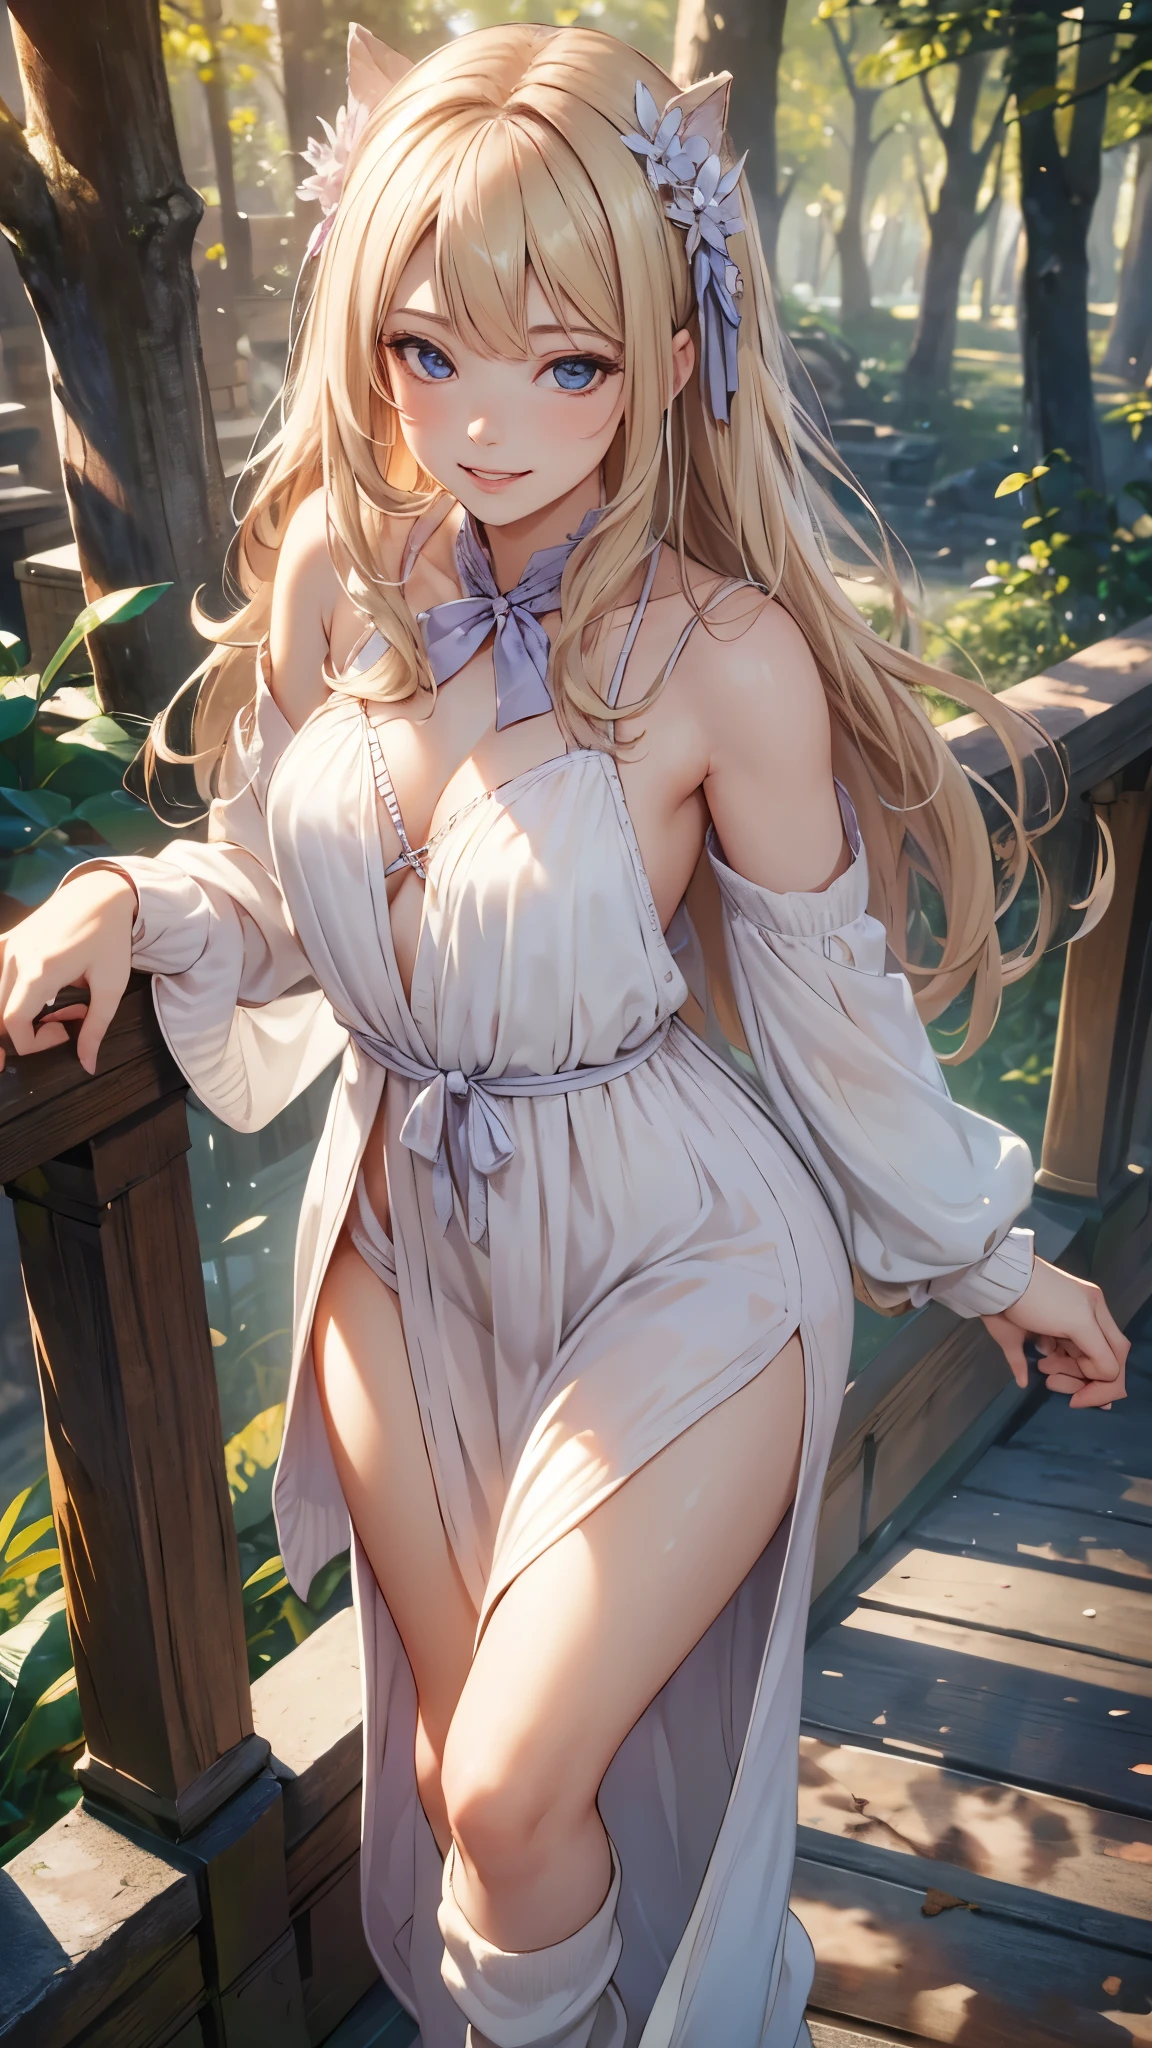 A beautiful young woman, 18 years old, grin,grin,((peace sign,peace sign)),wearing a long white maxi dress, socks,short boots,with long flowing blonde hair, grinning with a slightly mischievous expression, standing in a serene outdoor setting, sunlight filtering through the trees, (best quality,4k,8k,highres,masterpiece:1.2),ultra-detailed,(realistic,photorealistic,photo-realistic:1.37),detailed facial features, beautiful eyes, nose, and lips, intricate fabric textures, natural lighting, cinematic composition, vibrant colors, fantasy,ethereal